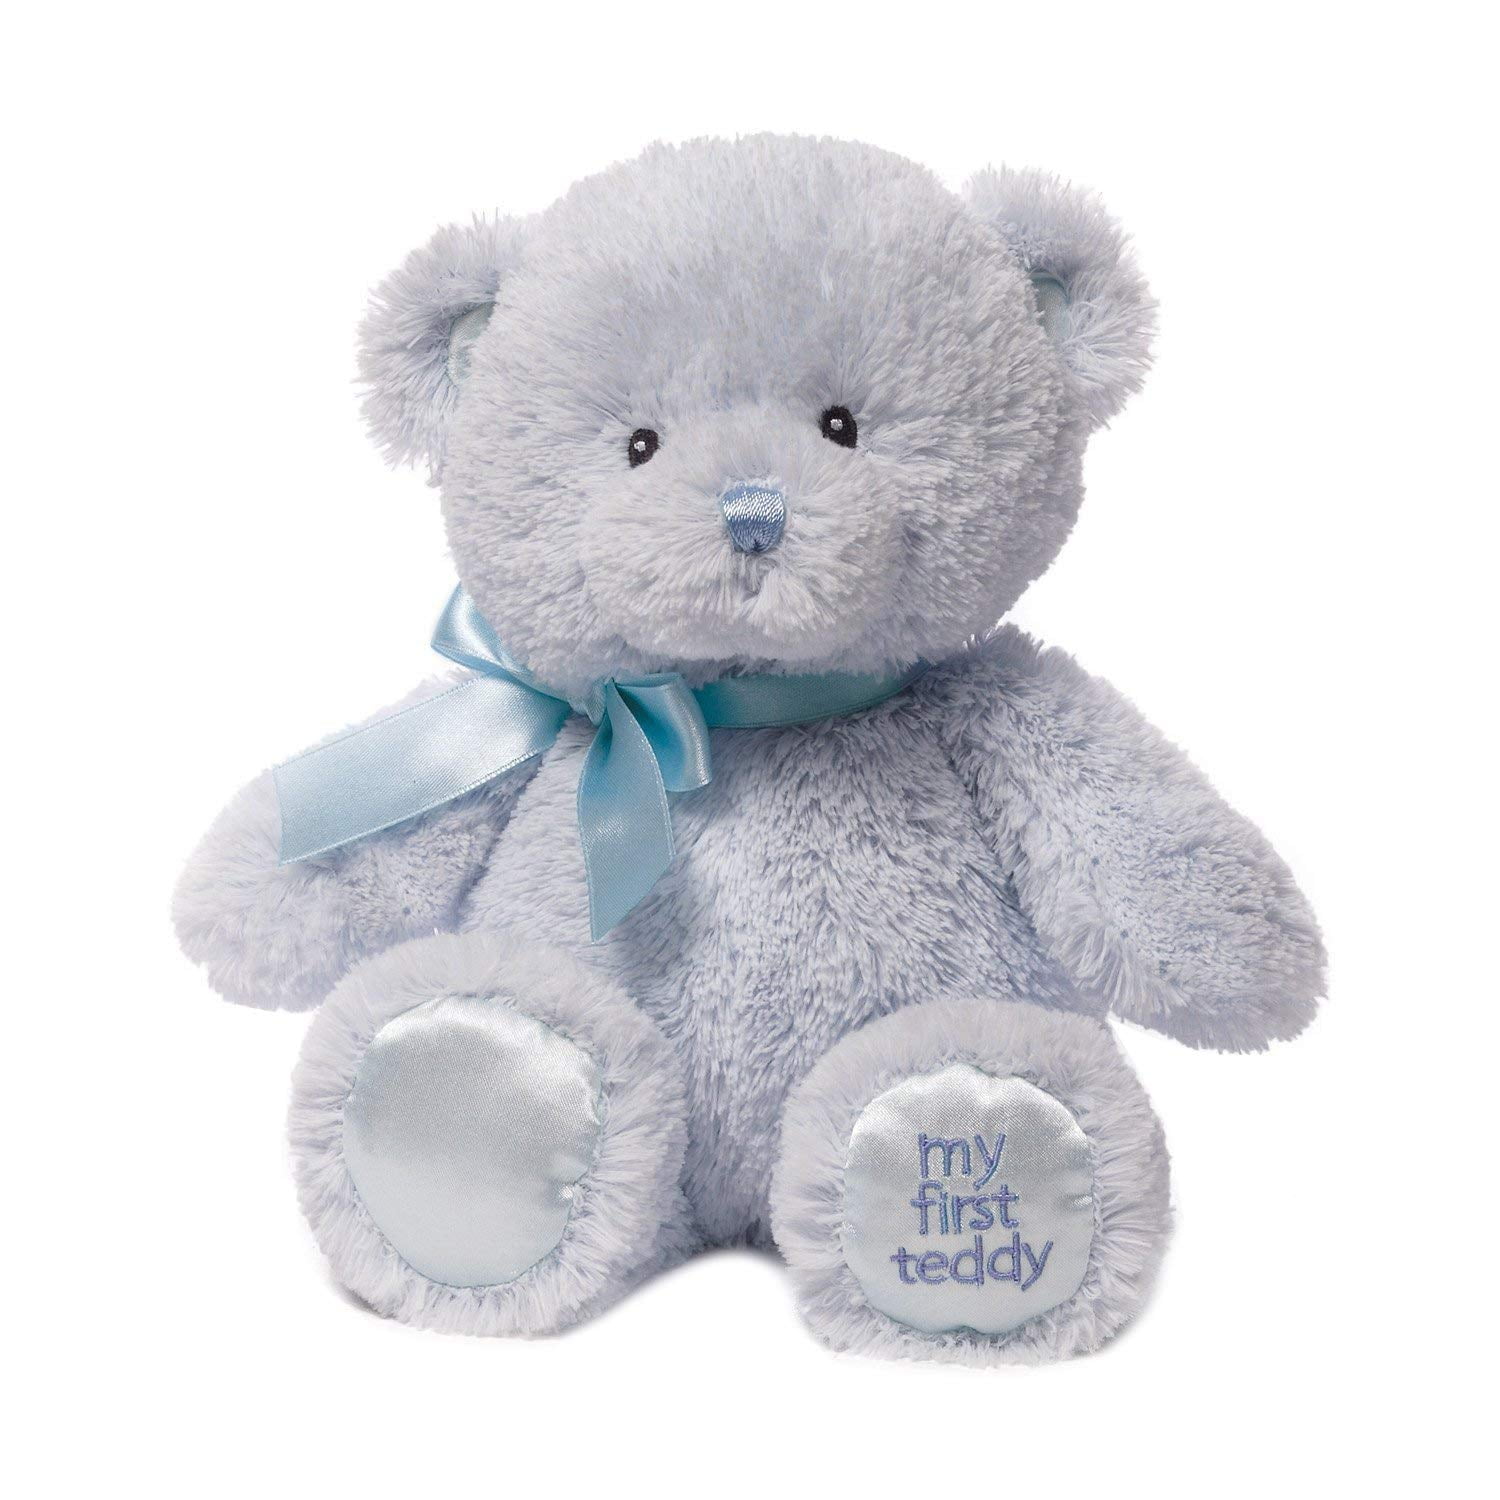 GUND My First Teddy Bear Baby Stuffed Animal 10 Inches 4043974 028399065844 for sale online 